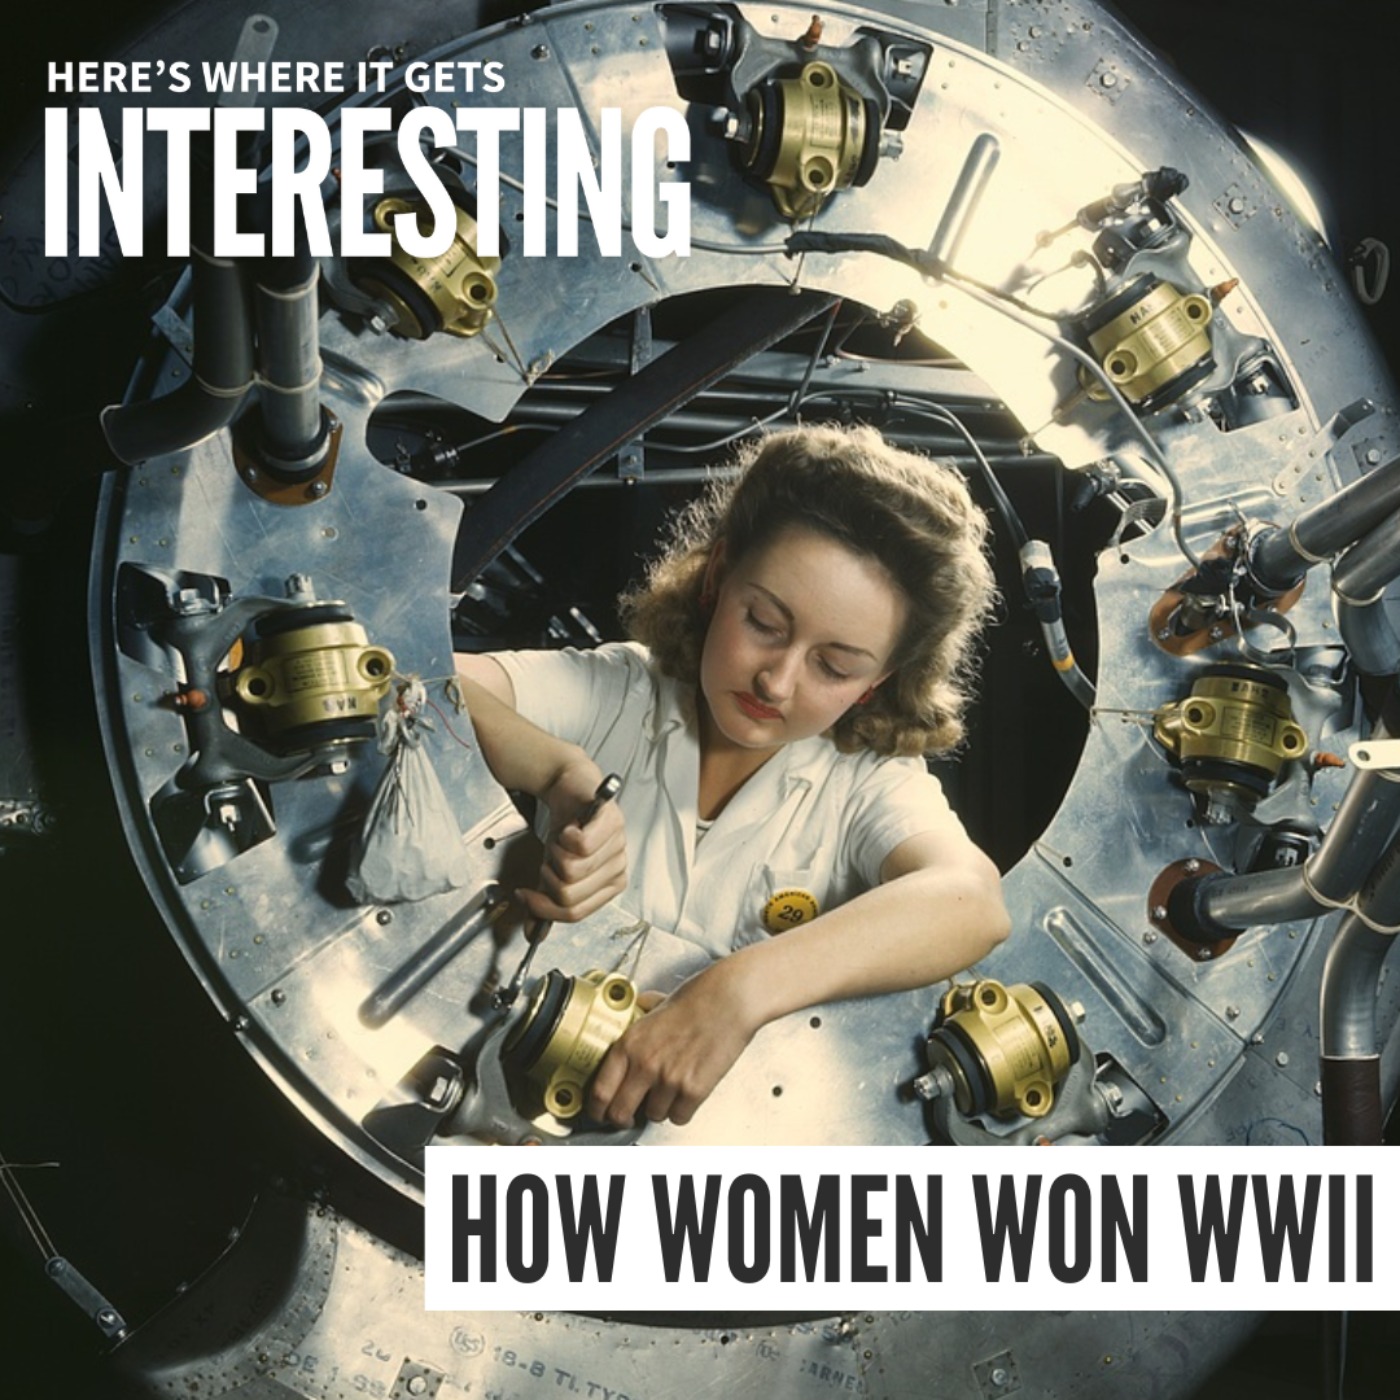 How Women Won WWII: Caught by the Enemy